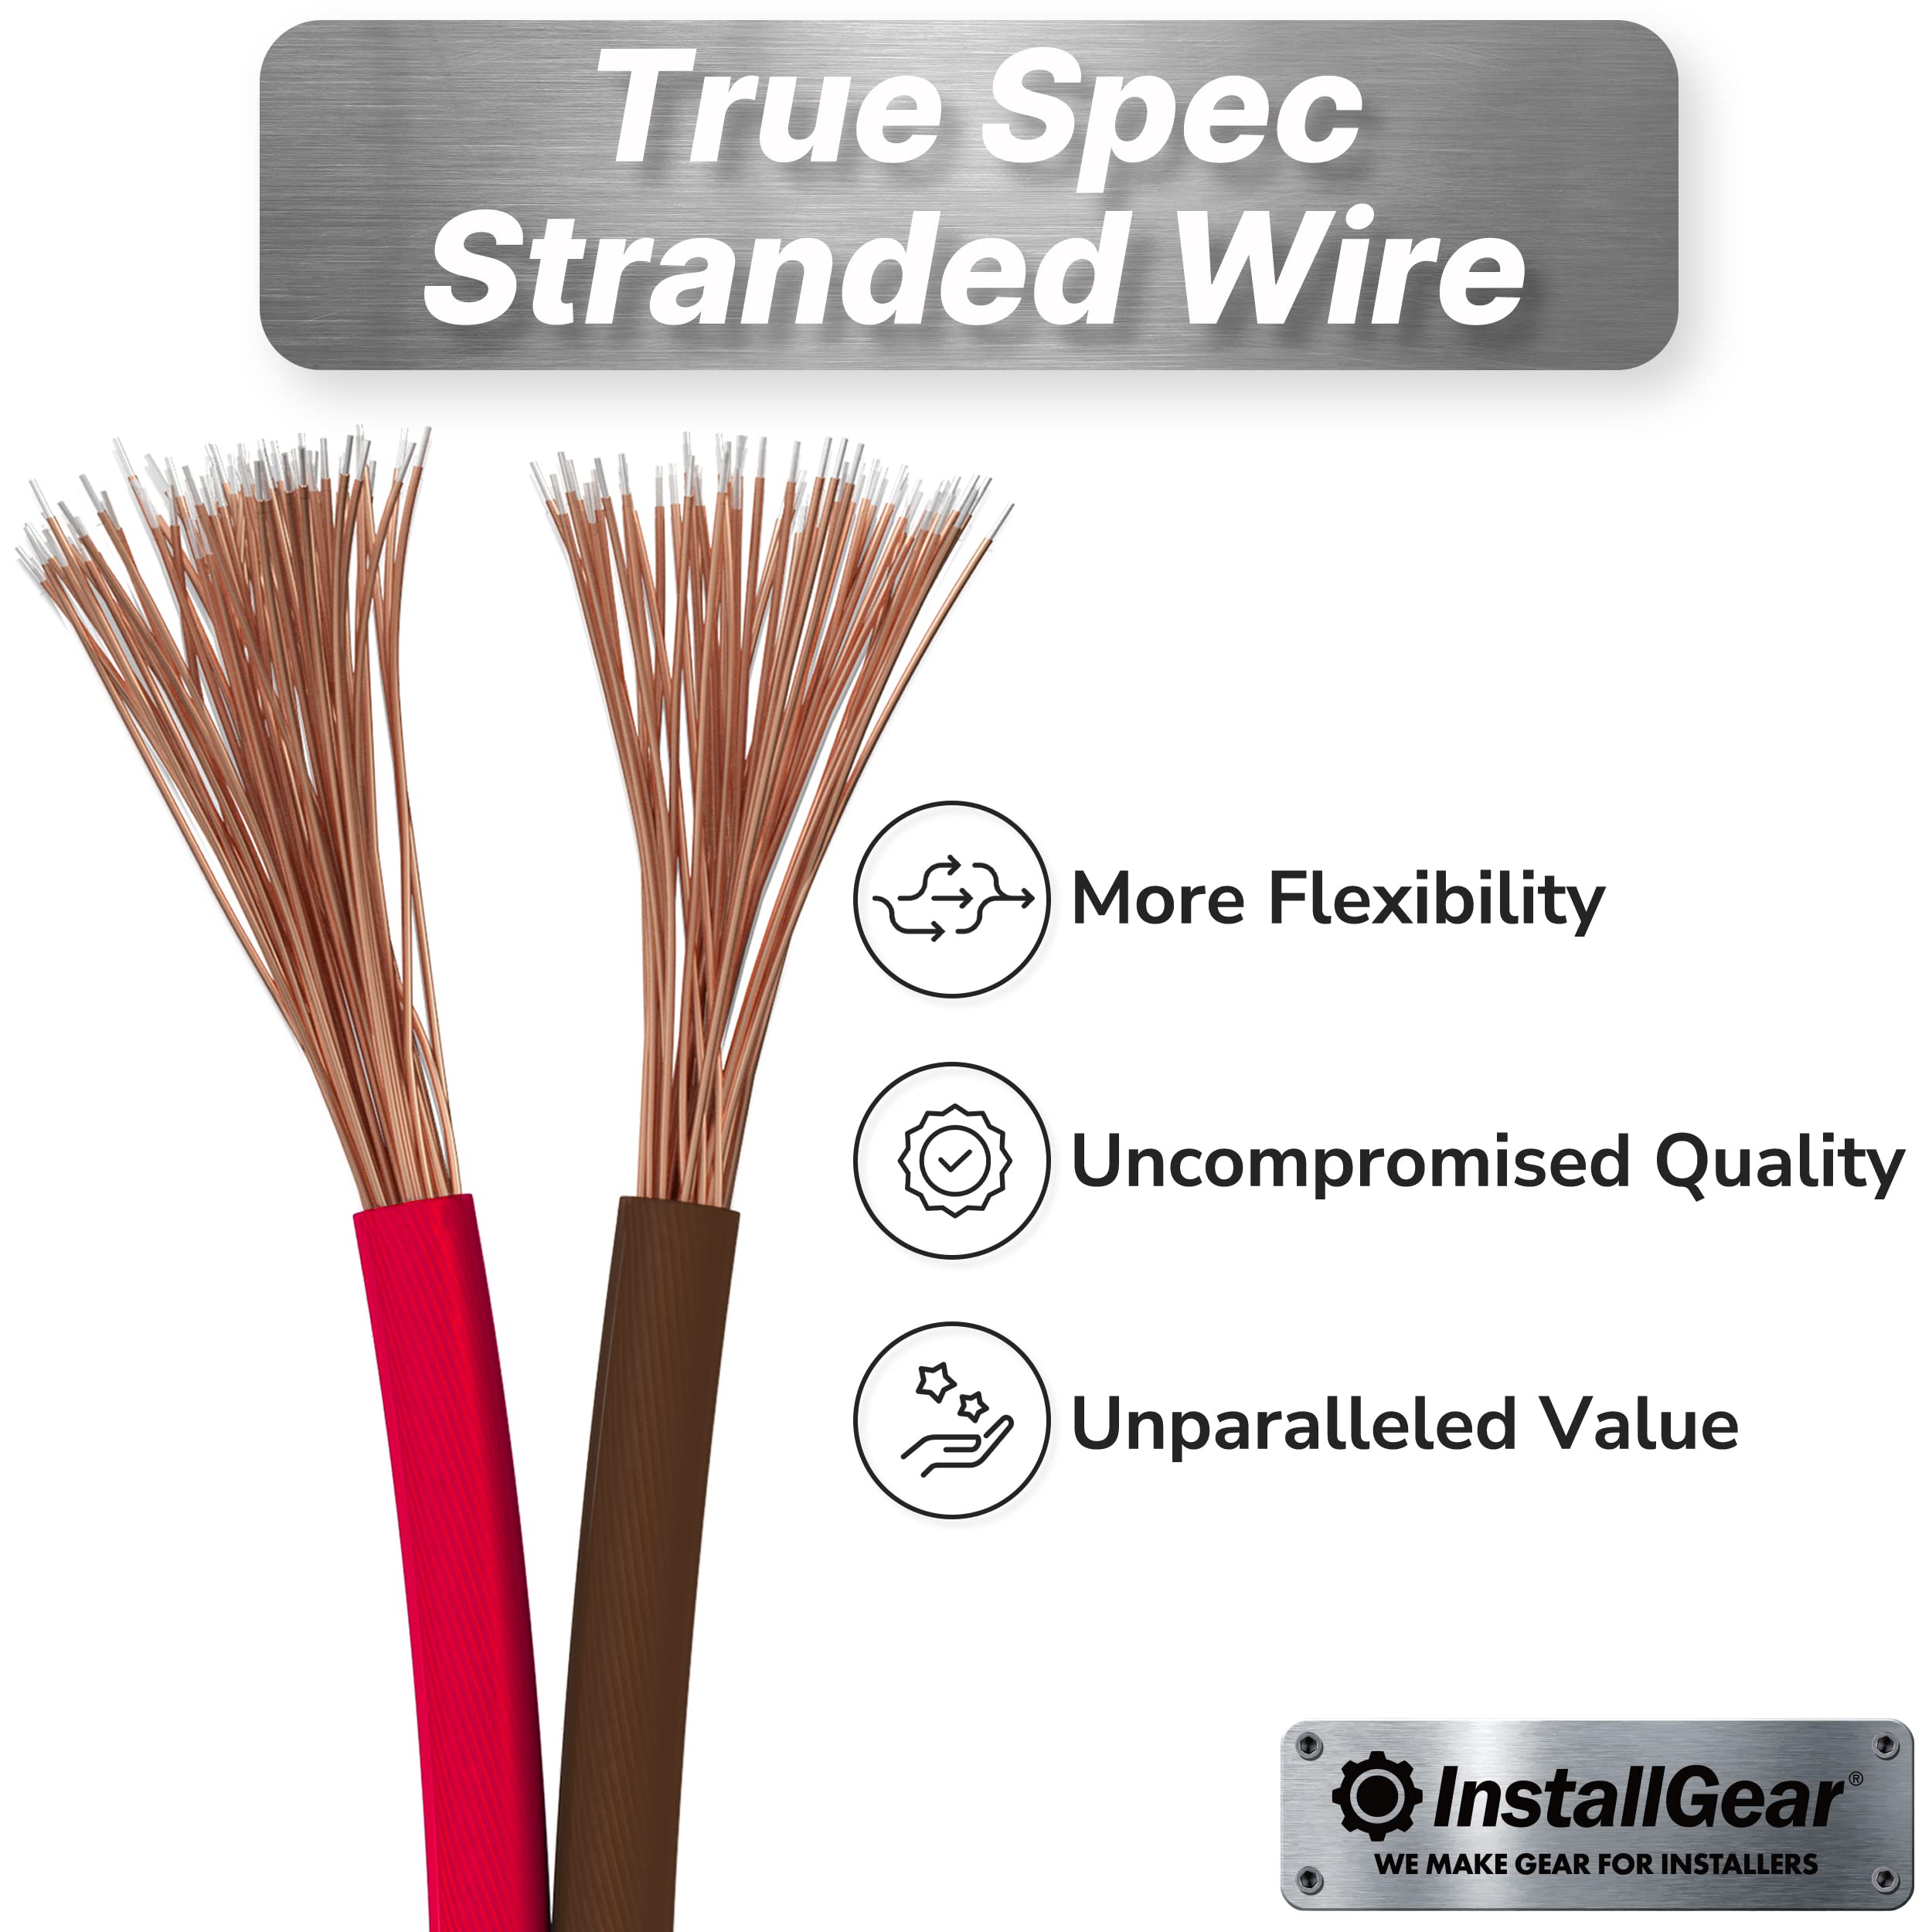 InstallGear 16 Gauge AWG Speaker Wire True Spec and Soft Touch Cable Wire (100ft Red/Black) | Car Speaker Wire, Stereos, Home Theater Speakers, Surround Sound, Radio | 16 Gauge Speaker Wire/Cable